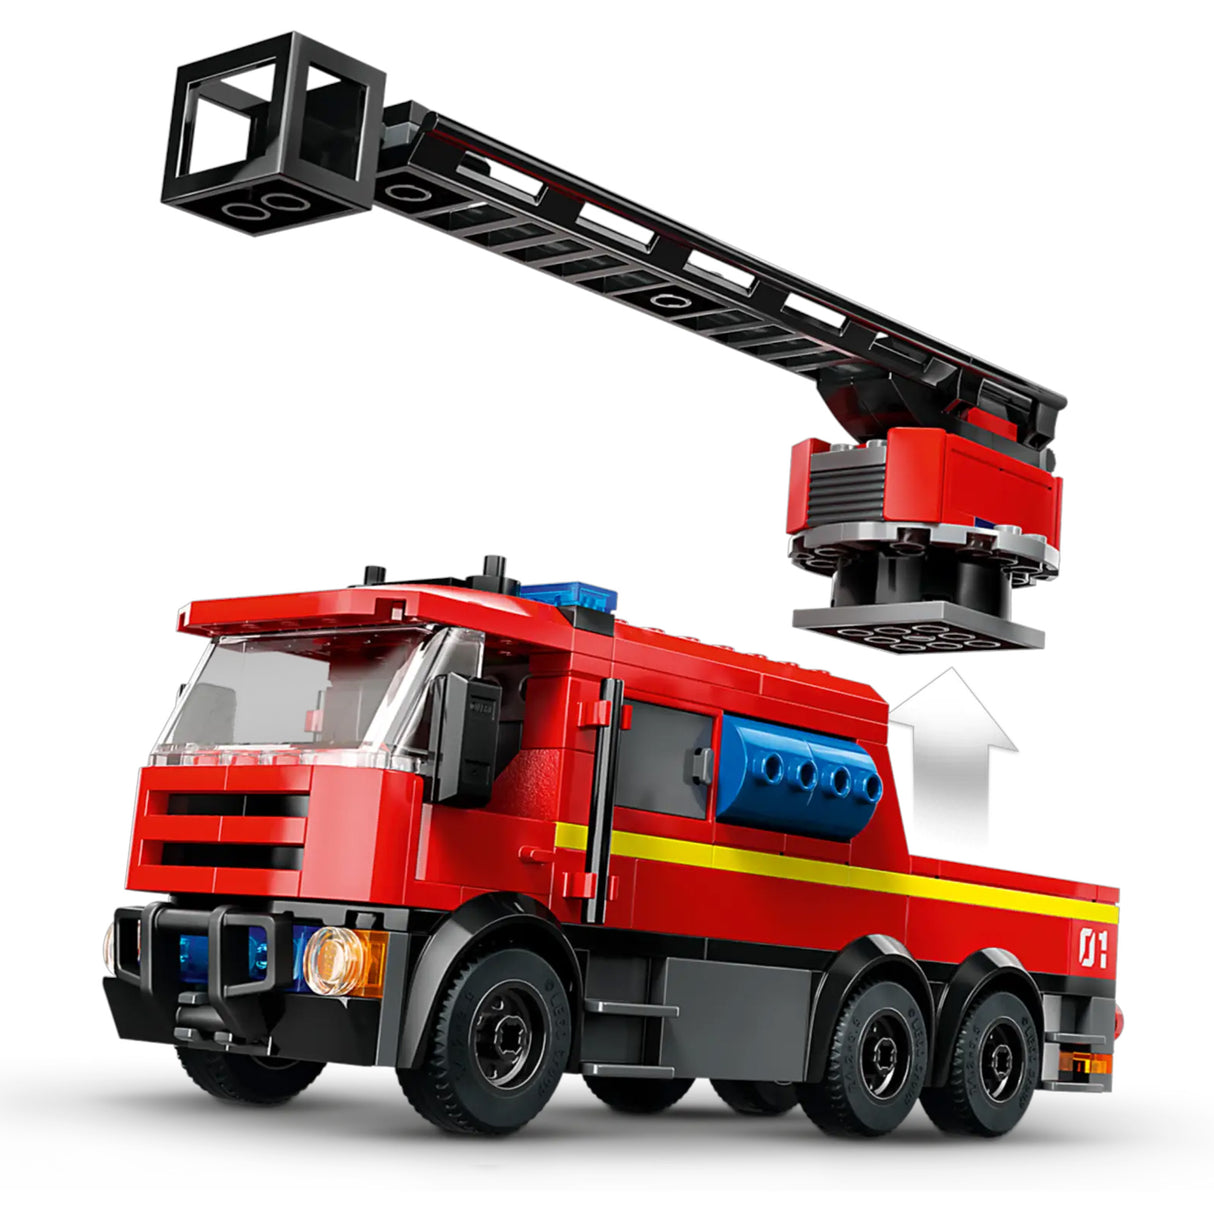 LEGO City Fire Station with Fire Truck 60414, (843-pieces)